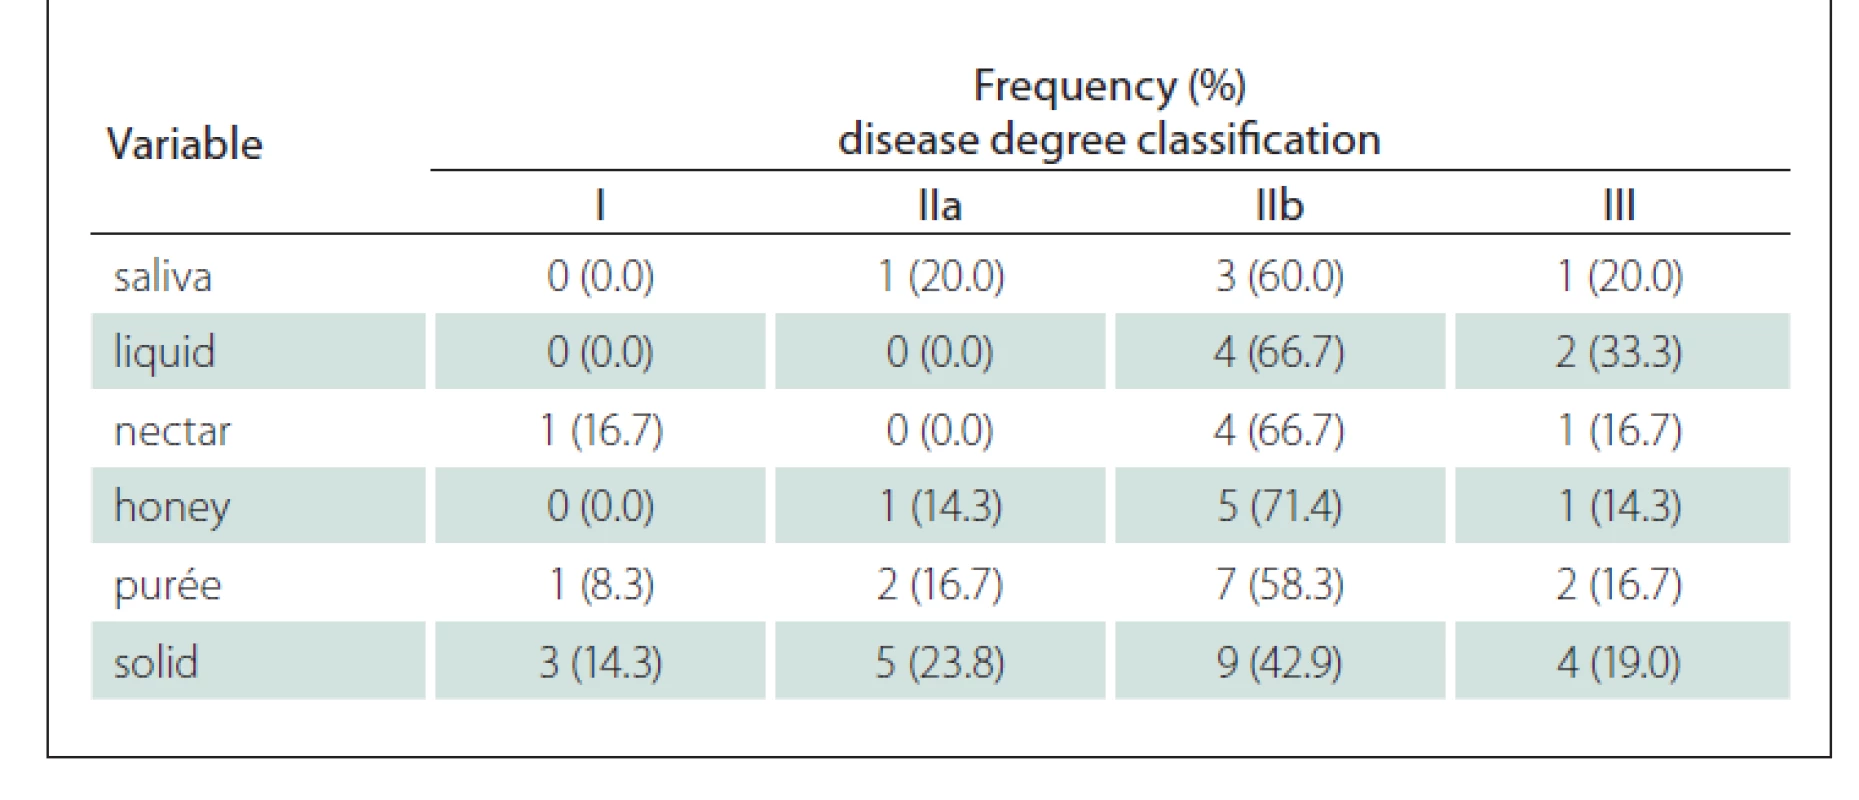 Frequency and percentage of stasis according to the Fiberoptic Endoscopic
Evaluation of Swallowing in relation to the degree of the disease.